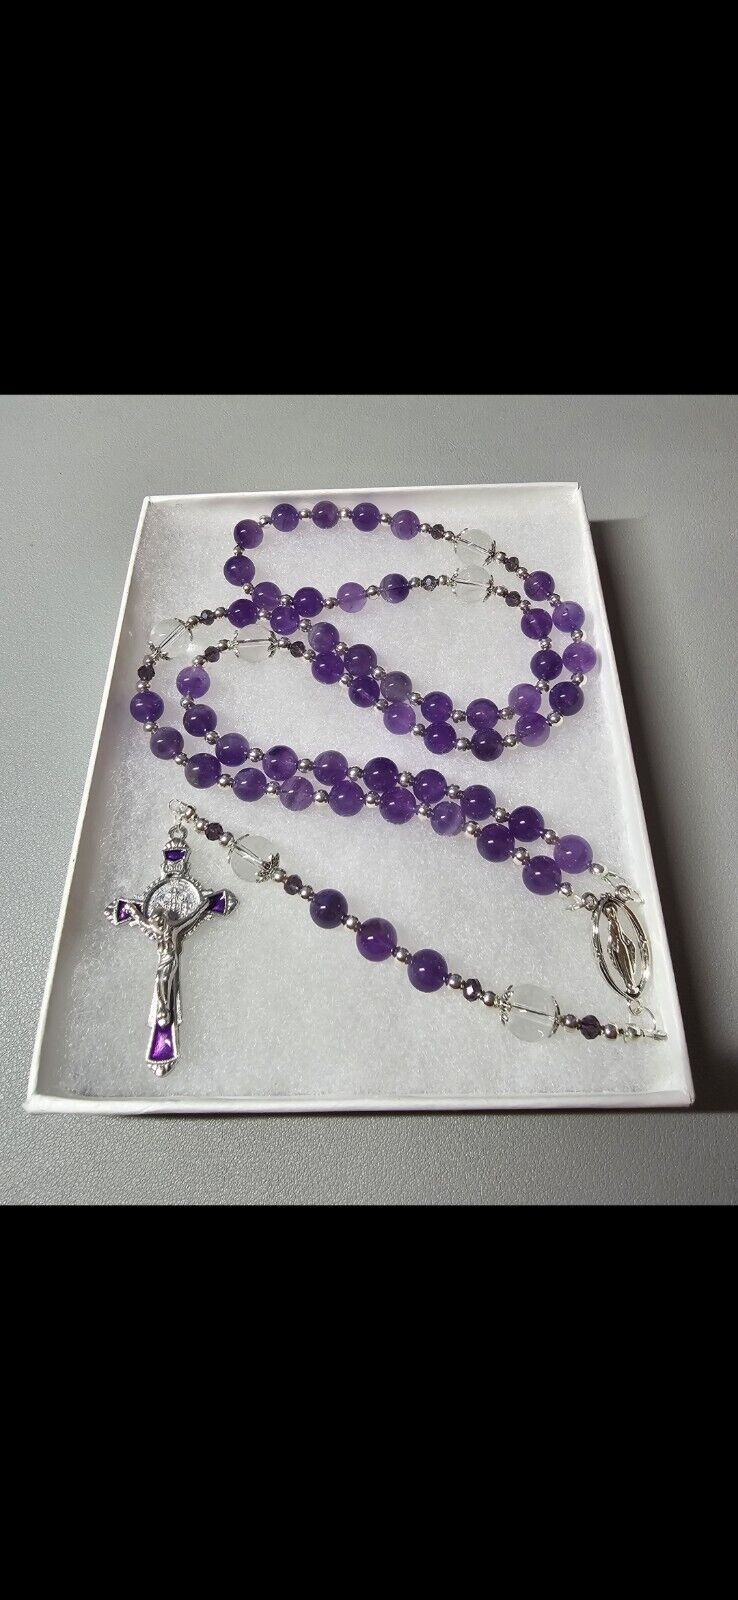 Large One Of A Kind Hand Crafted Rosary Made With Natural Amethyst And Quartz